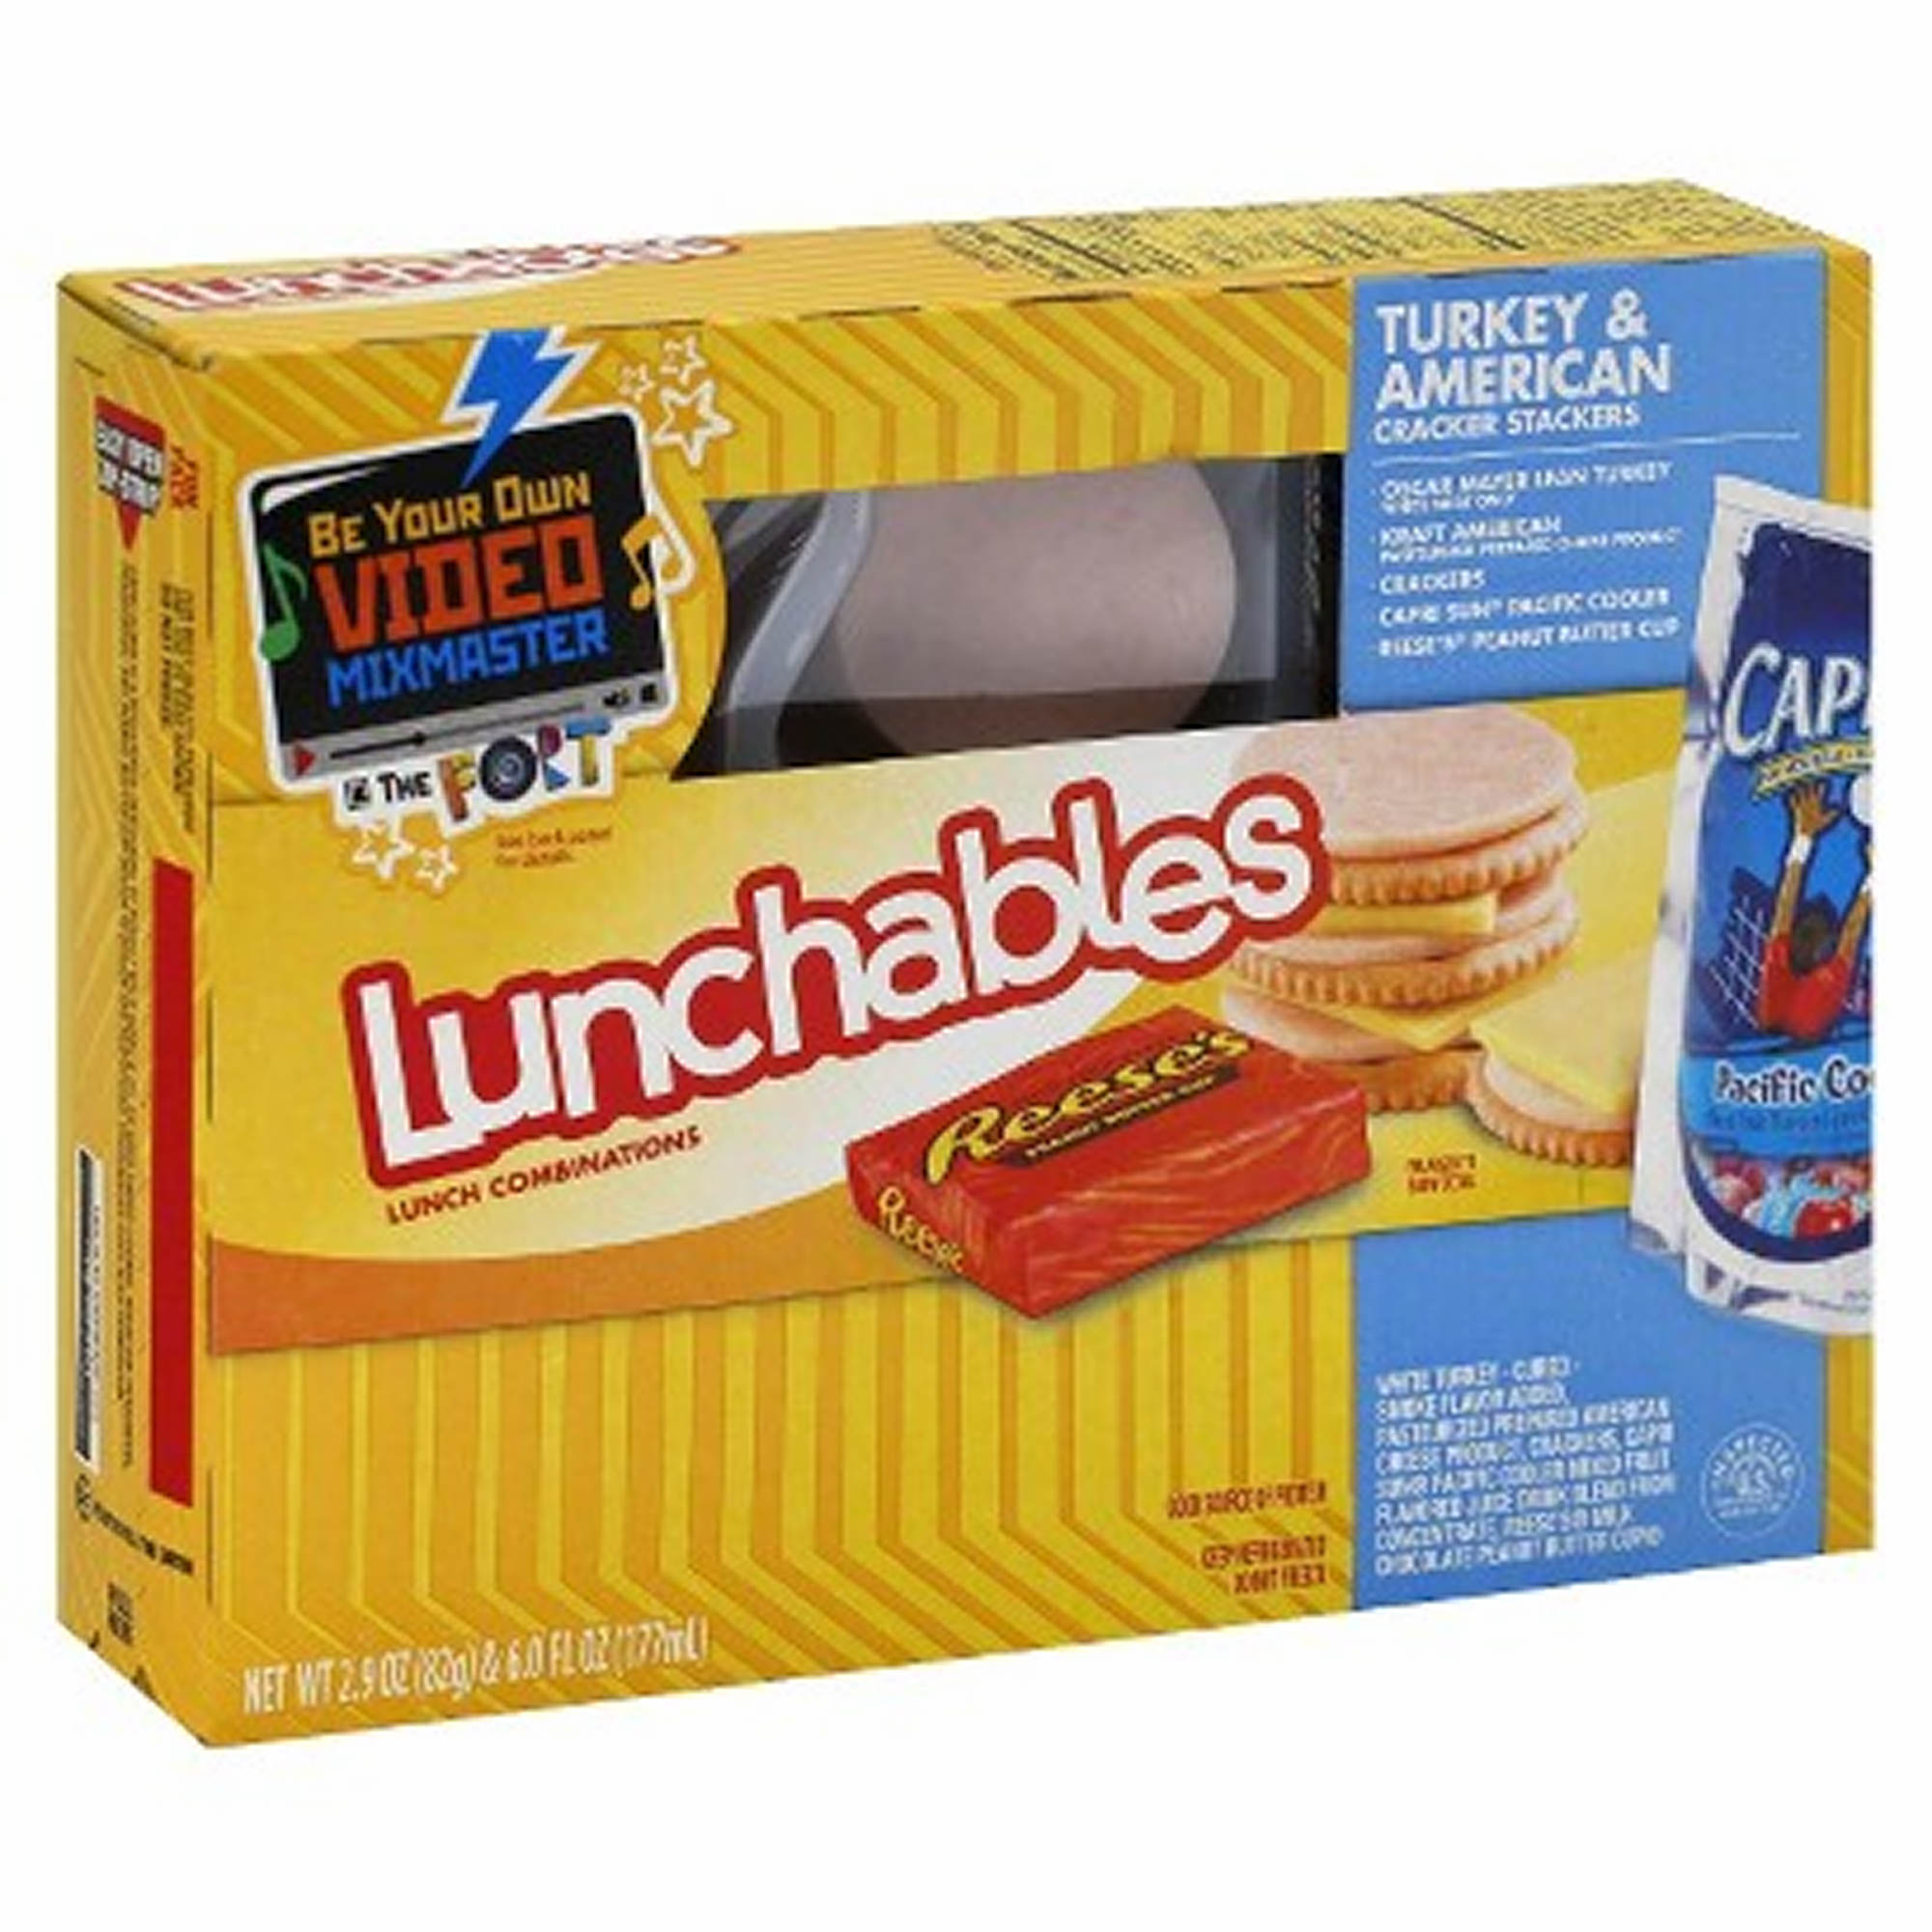 Lunchables Cracker Stackers Lunch Combinations, Ham & Cheddar, 1 kit [4